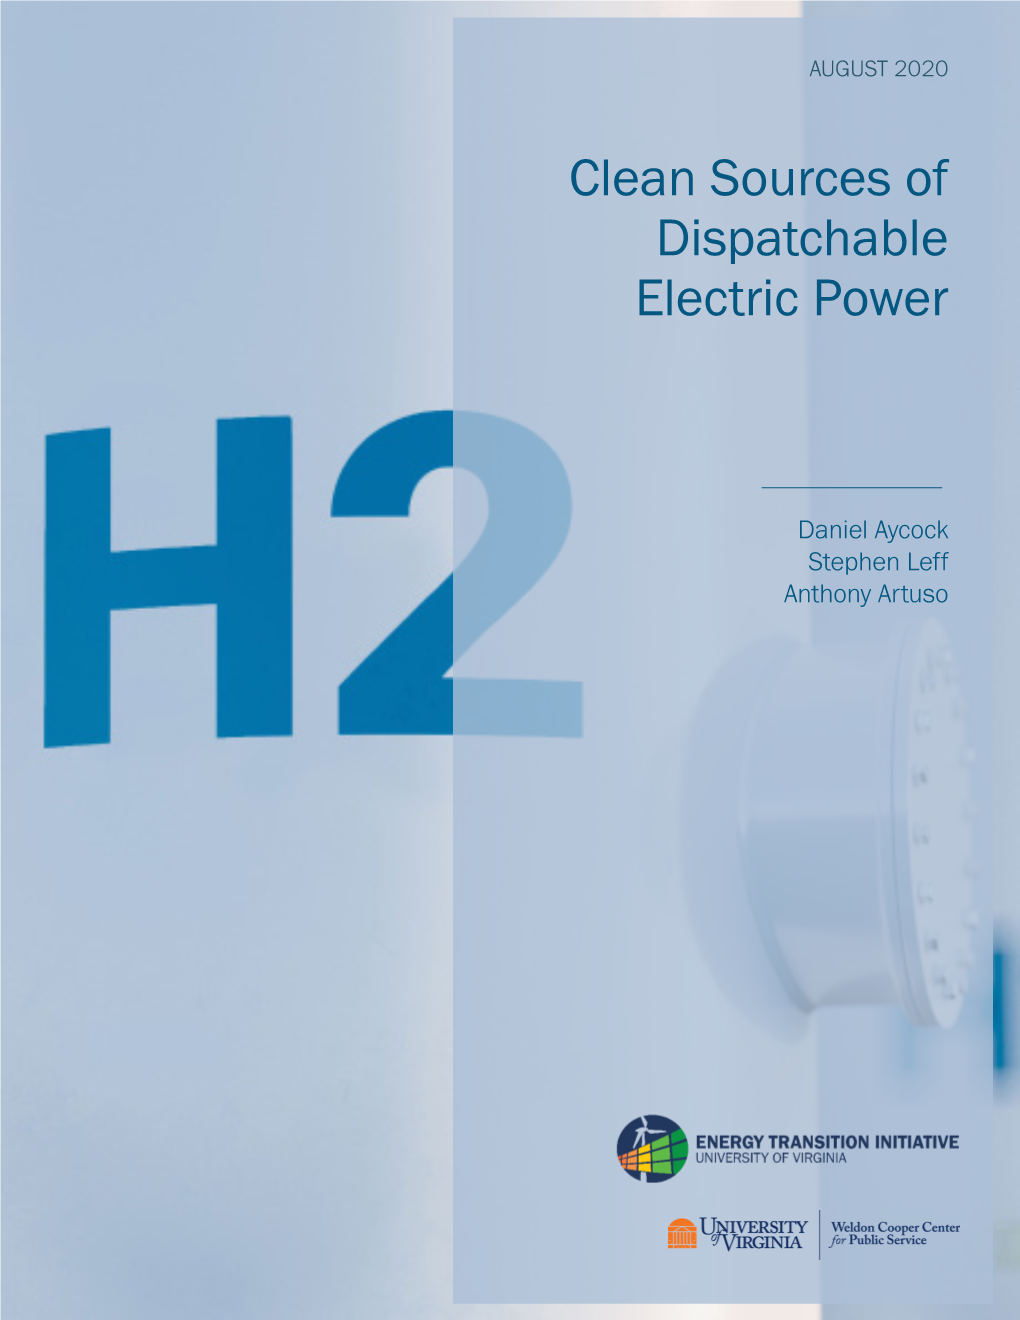 Clean Sources of Dispatchable Electric Power